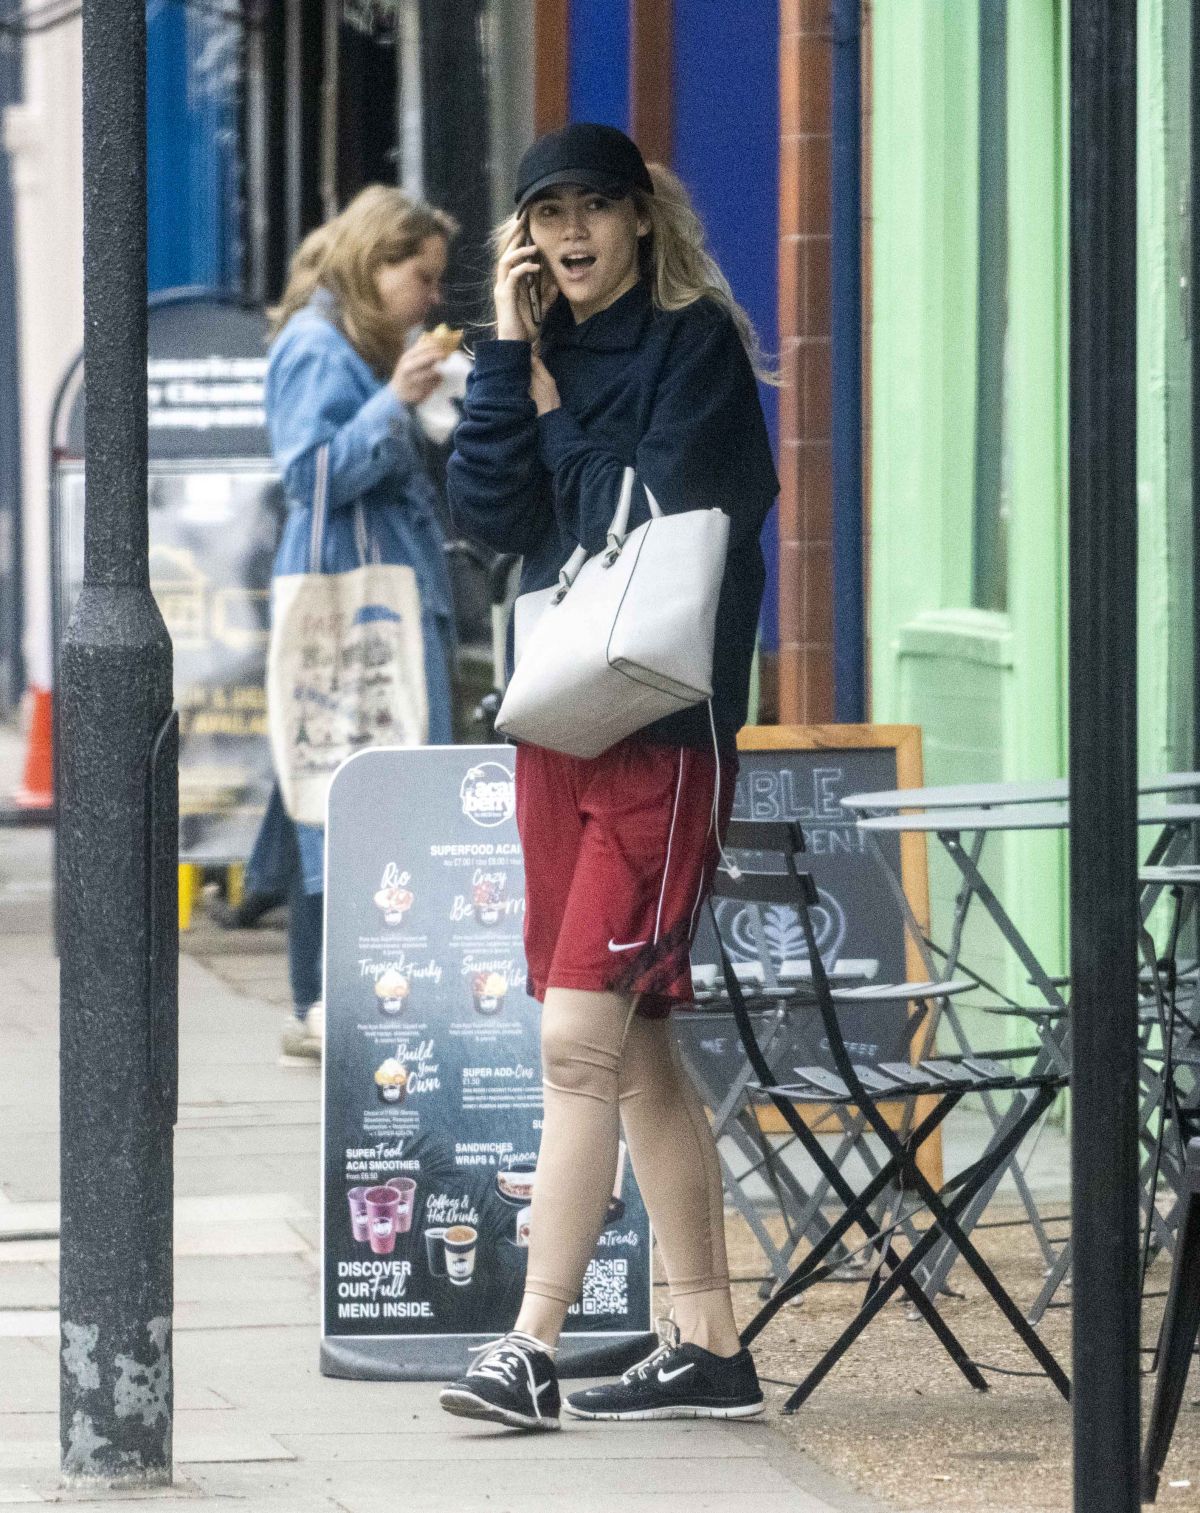 suki-and-immy-waterhouse-out-for-smoothies-in-notting-hill-05-20-2021-3.jpg